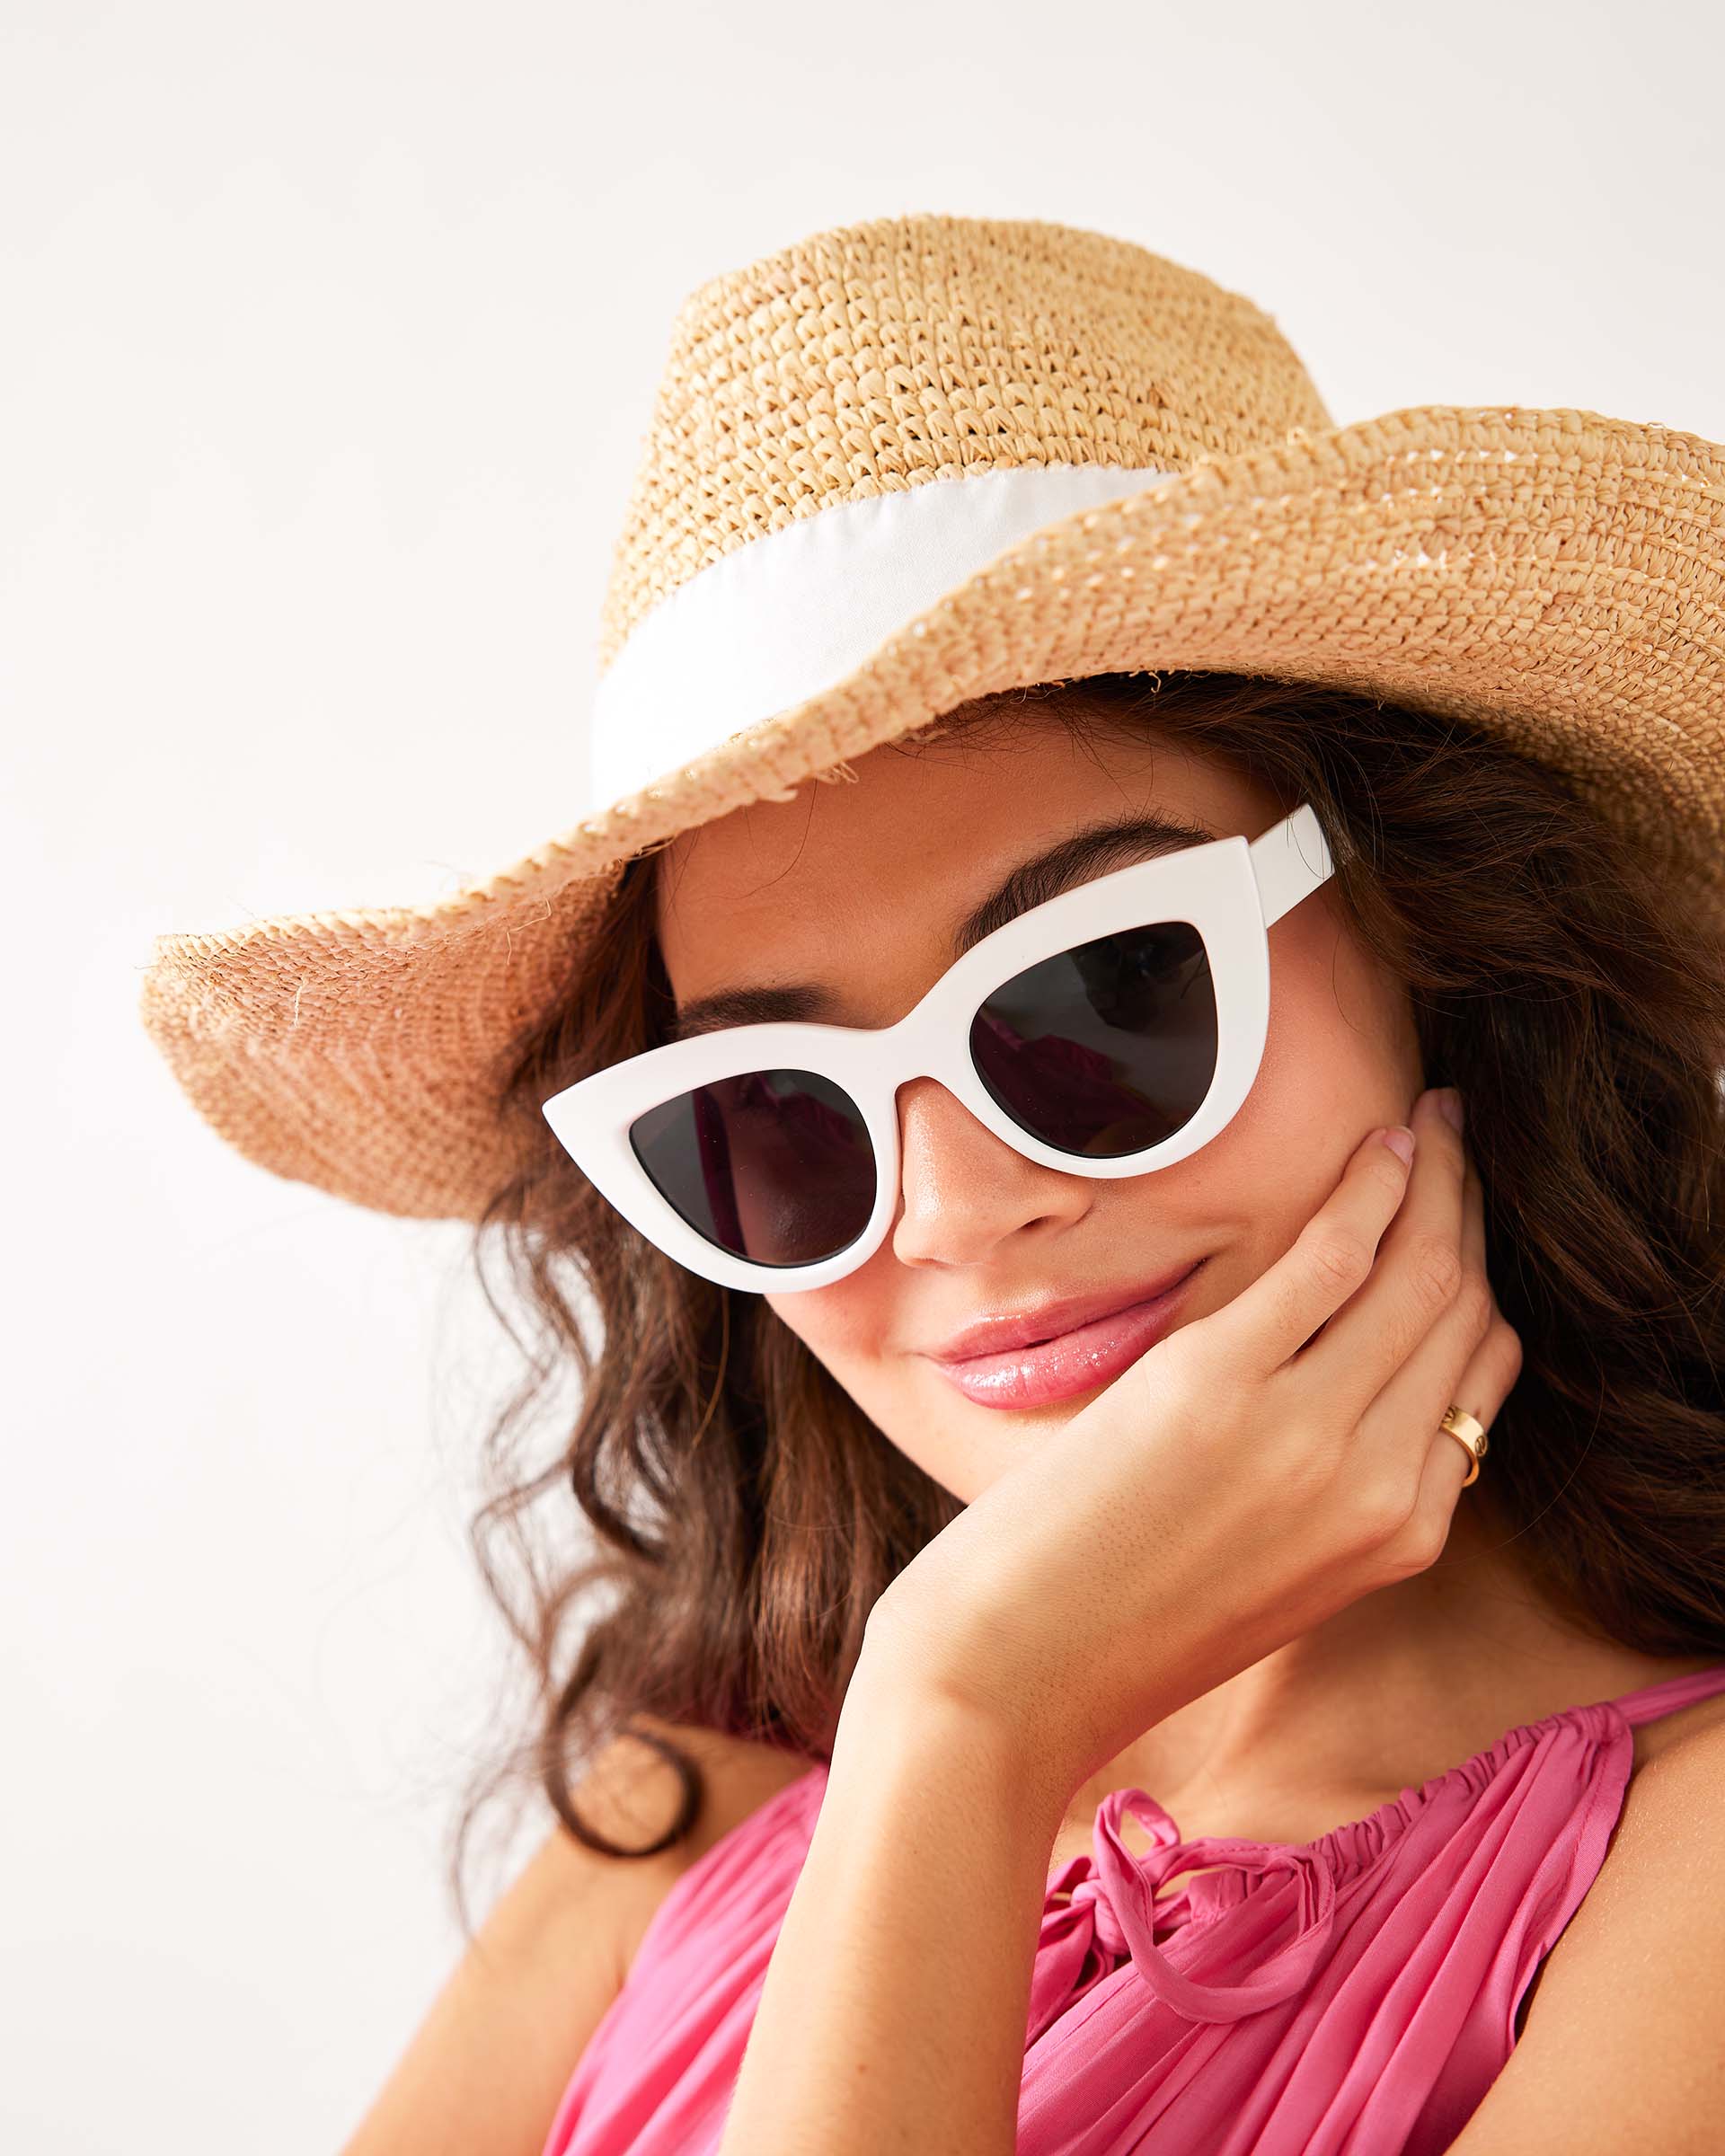 woman wearing sunglasses in a pink dress with mersea seagrove straw hat on